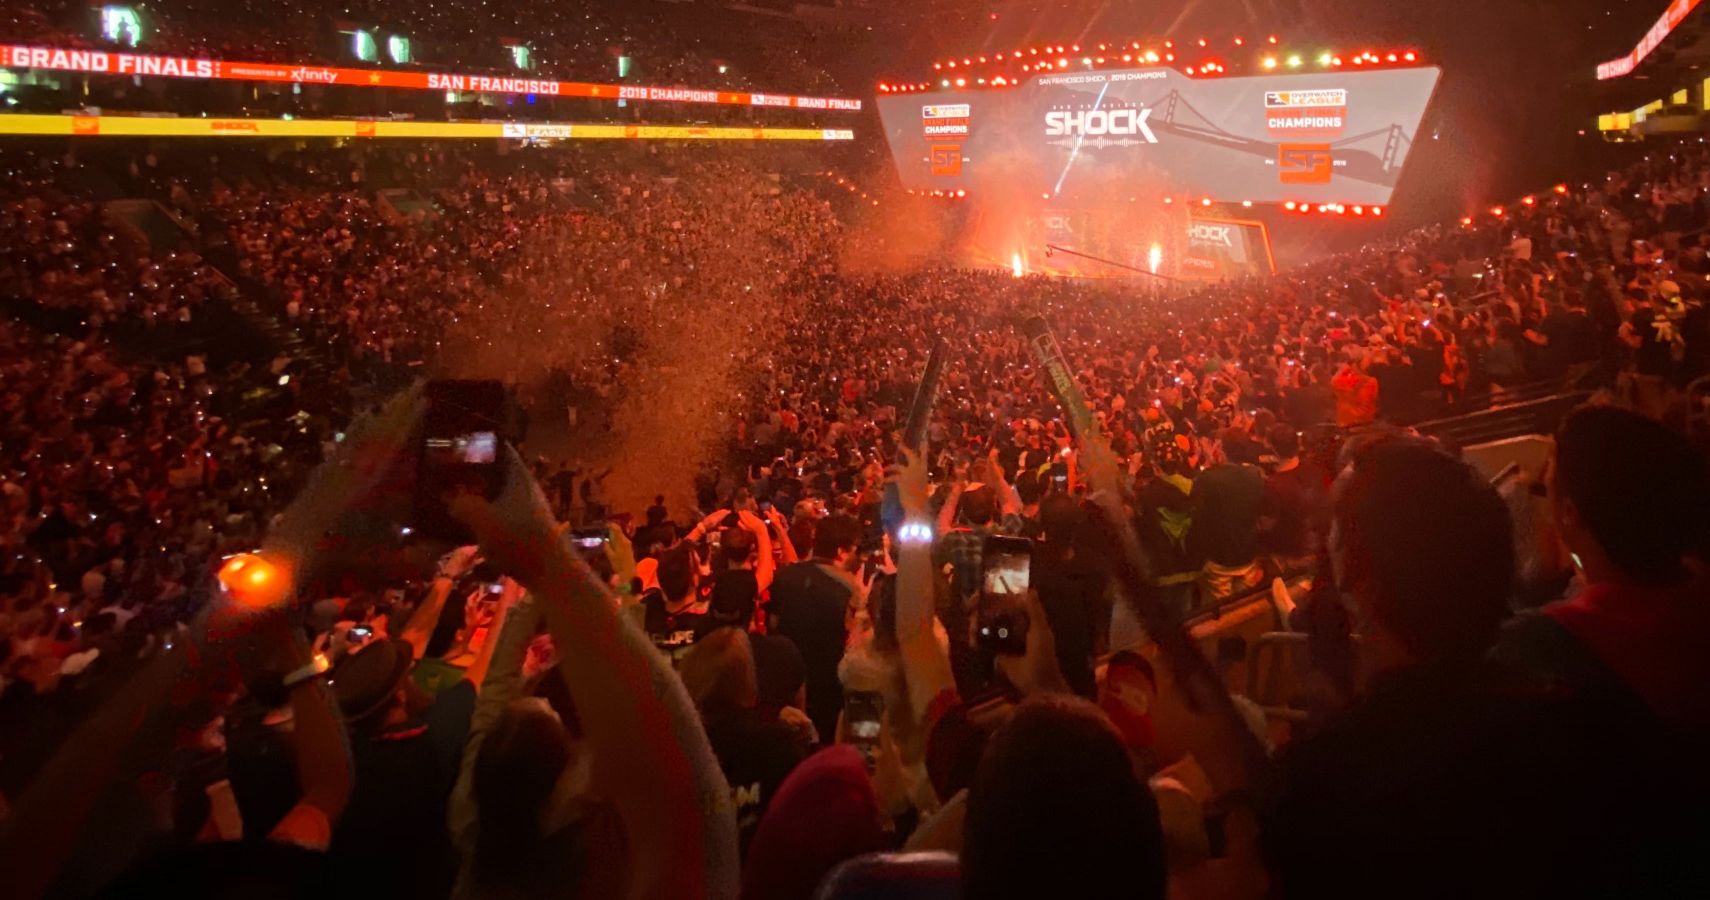 The crowd at the 2019 Overwatch League 2019 Grand Finals.